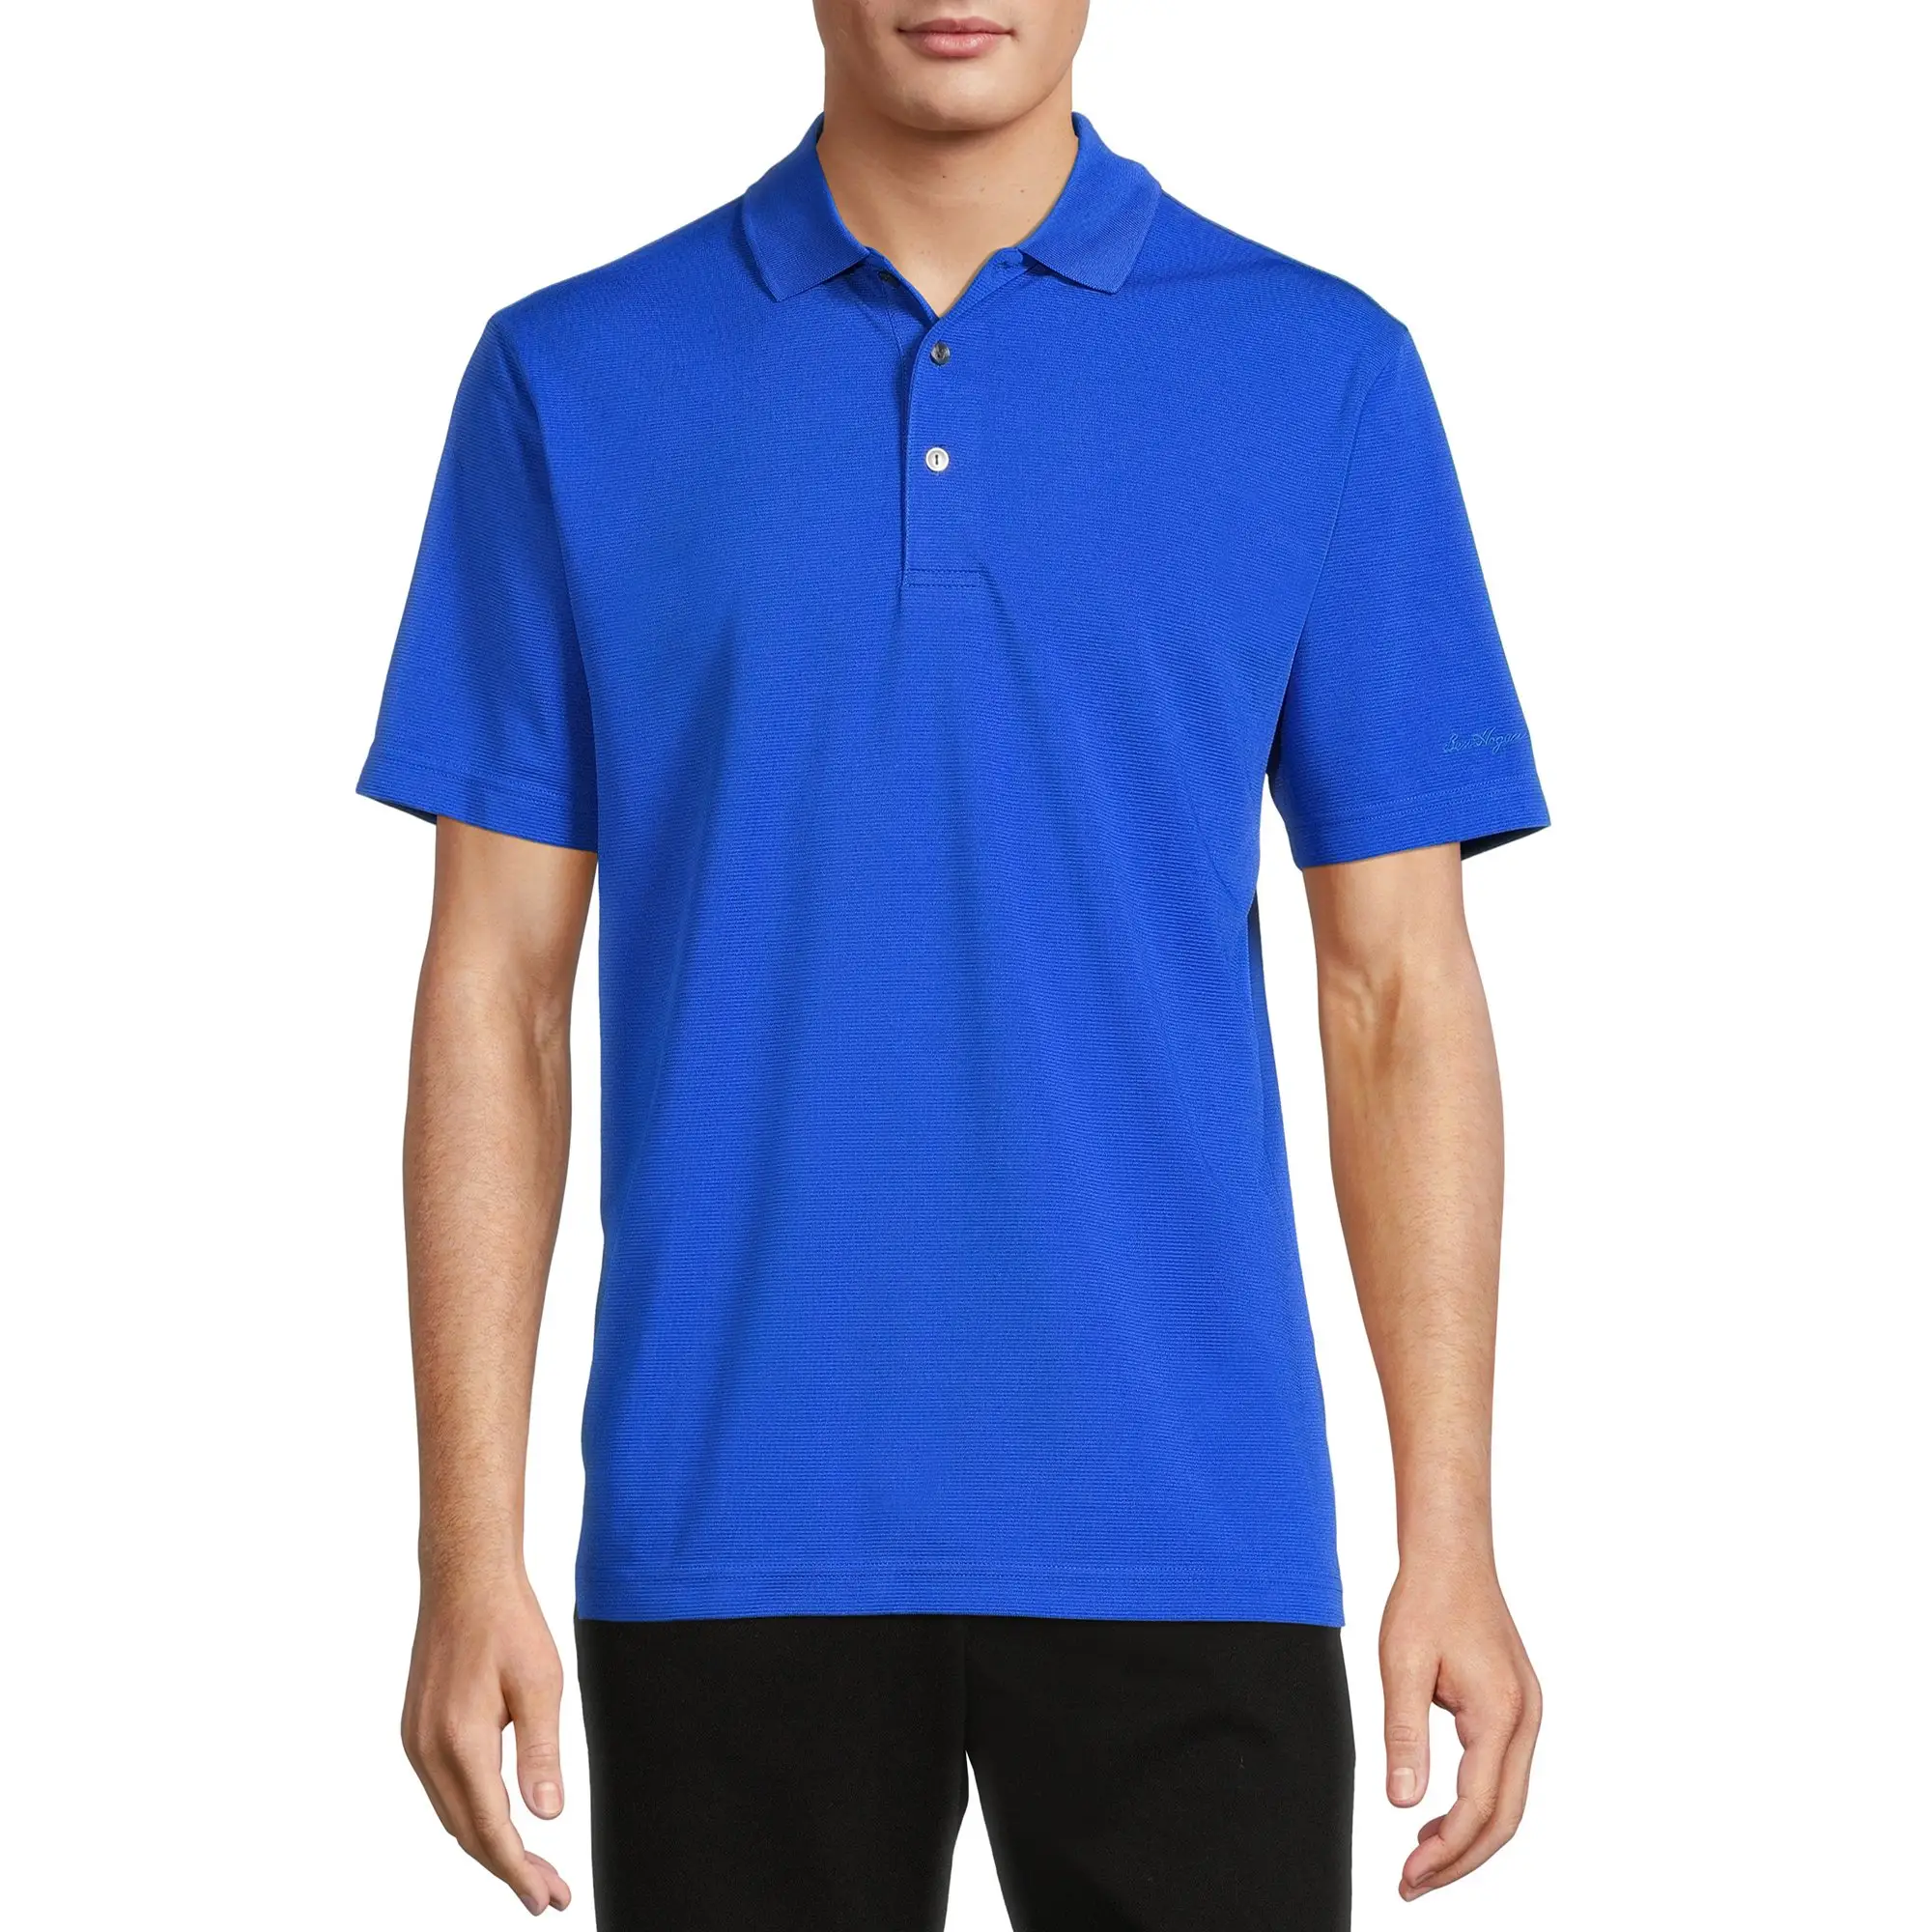 Factory Directly Custom 100 Polyester Interlock Dry Fit Mens Performance Golf Polo shirt